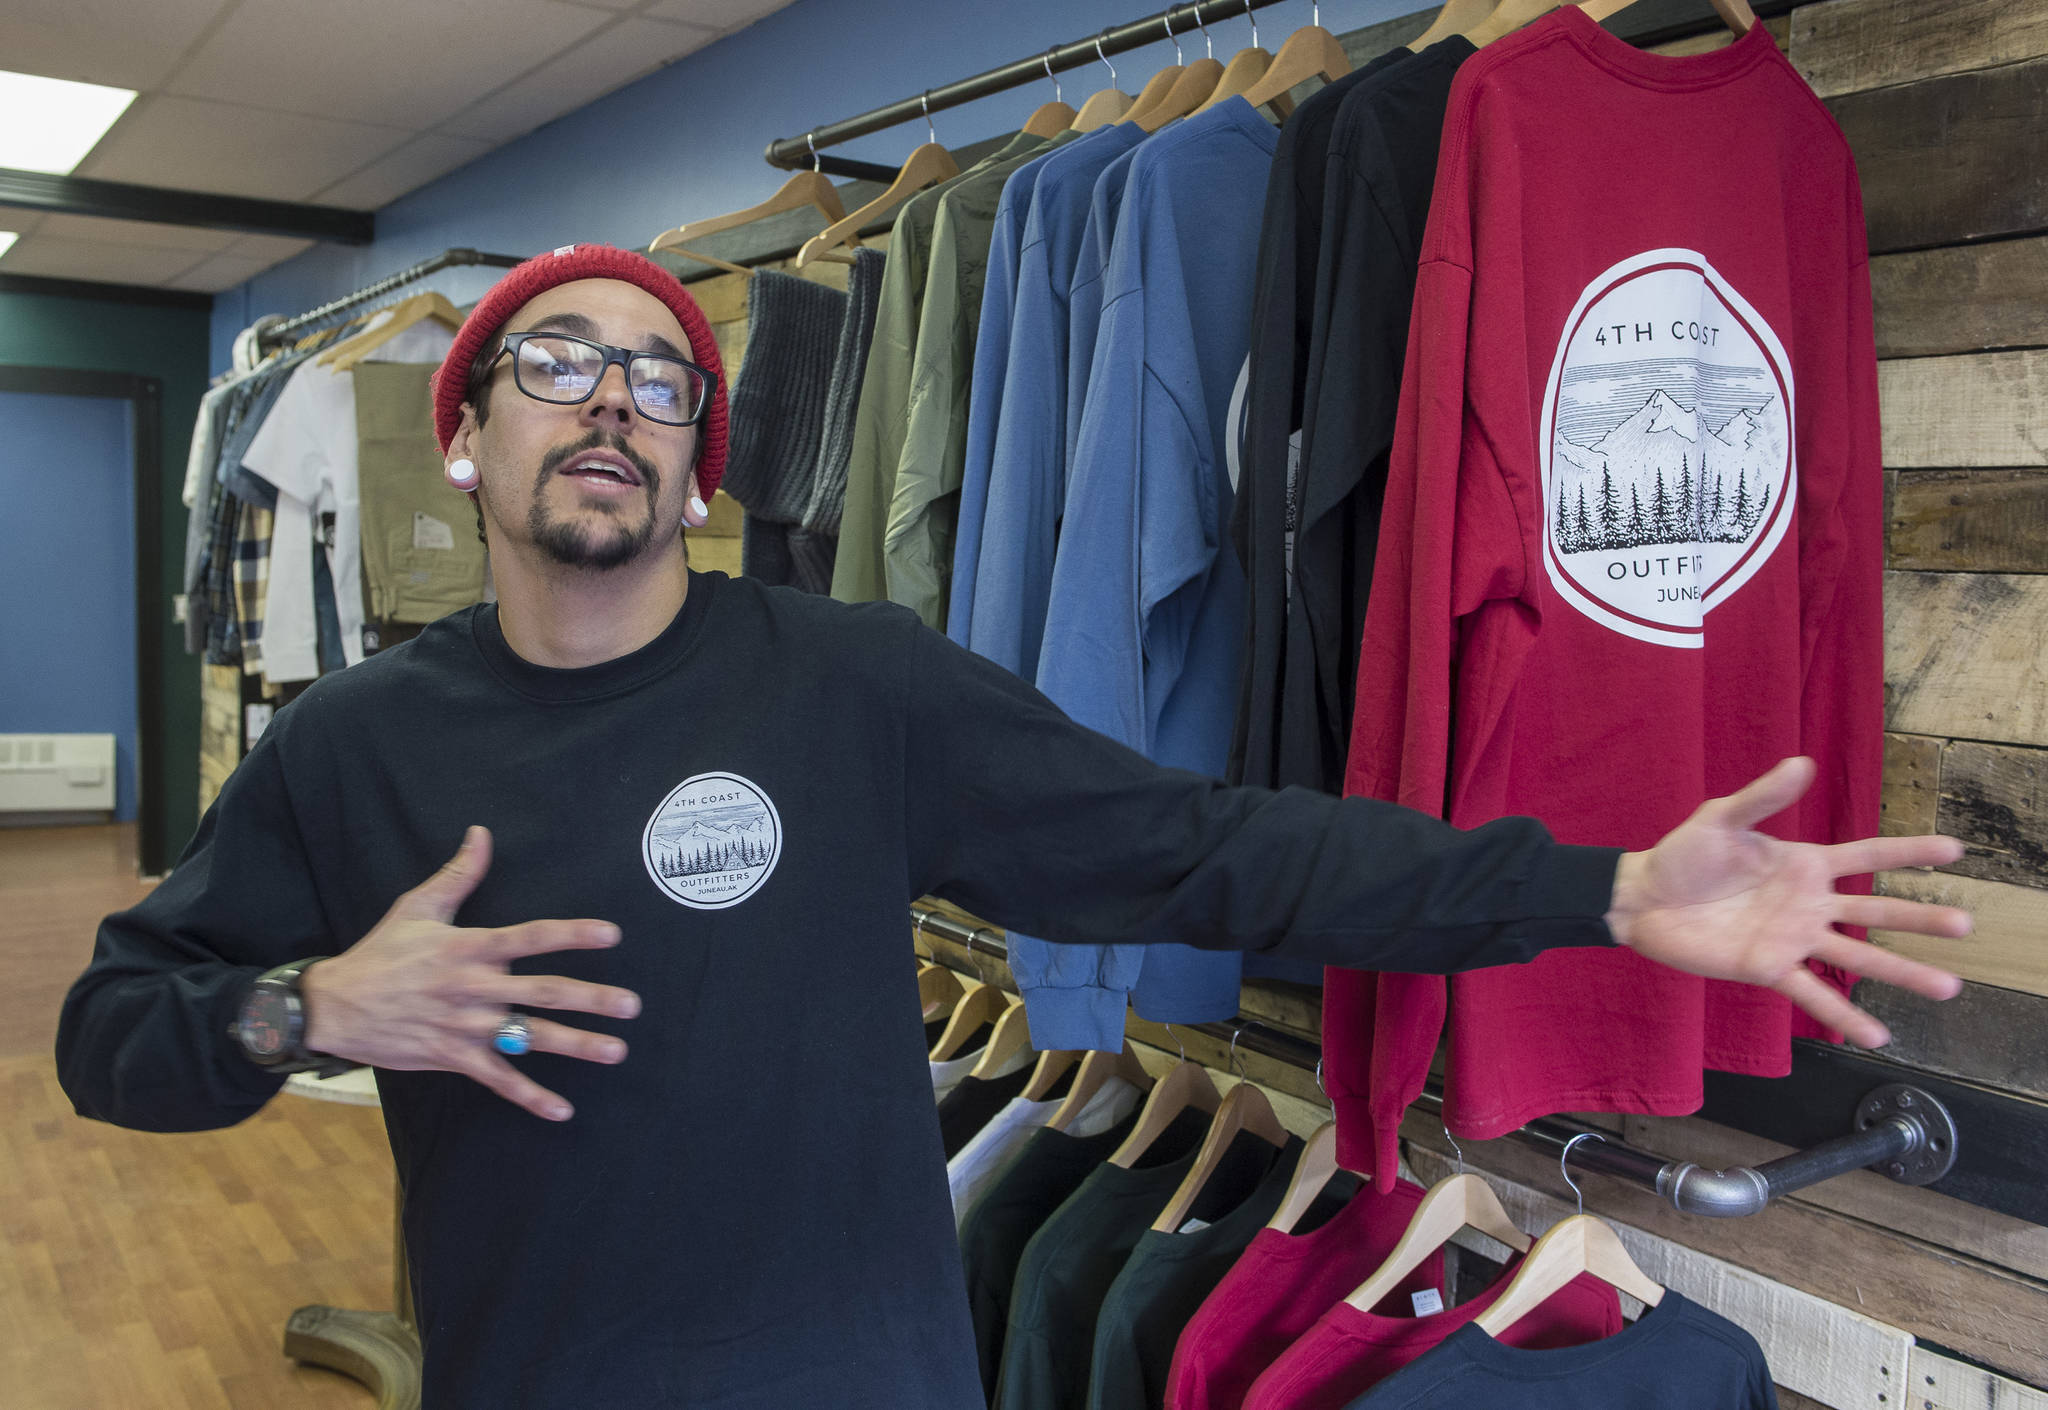 Gabriel Rivera talks about his new men’s clothing shop called 4th Coast Outfitters located on Seward Street on Thursday, March 1, 2018. (Michael Penn | Juneau Empire)